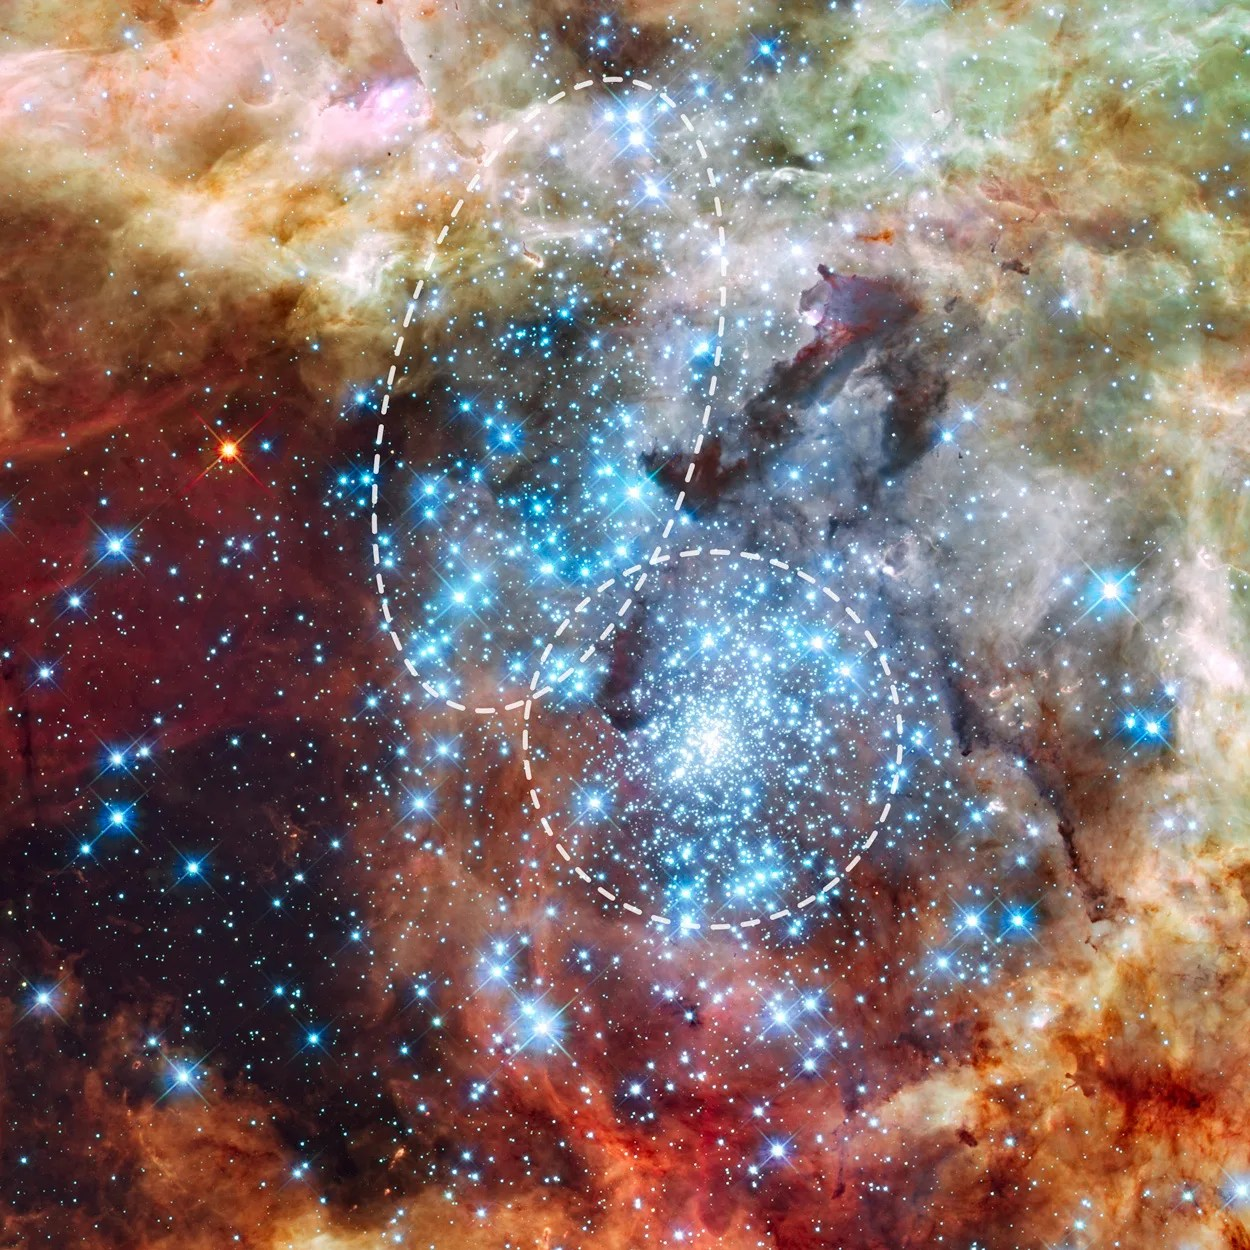 Astronomers using data from NASA's Hubble Space Telescope have caught two clusters full of massive stars that may be in the early stages of merging.